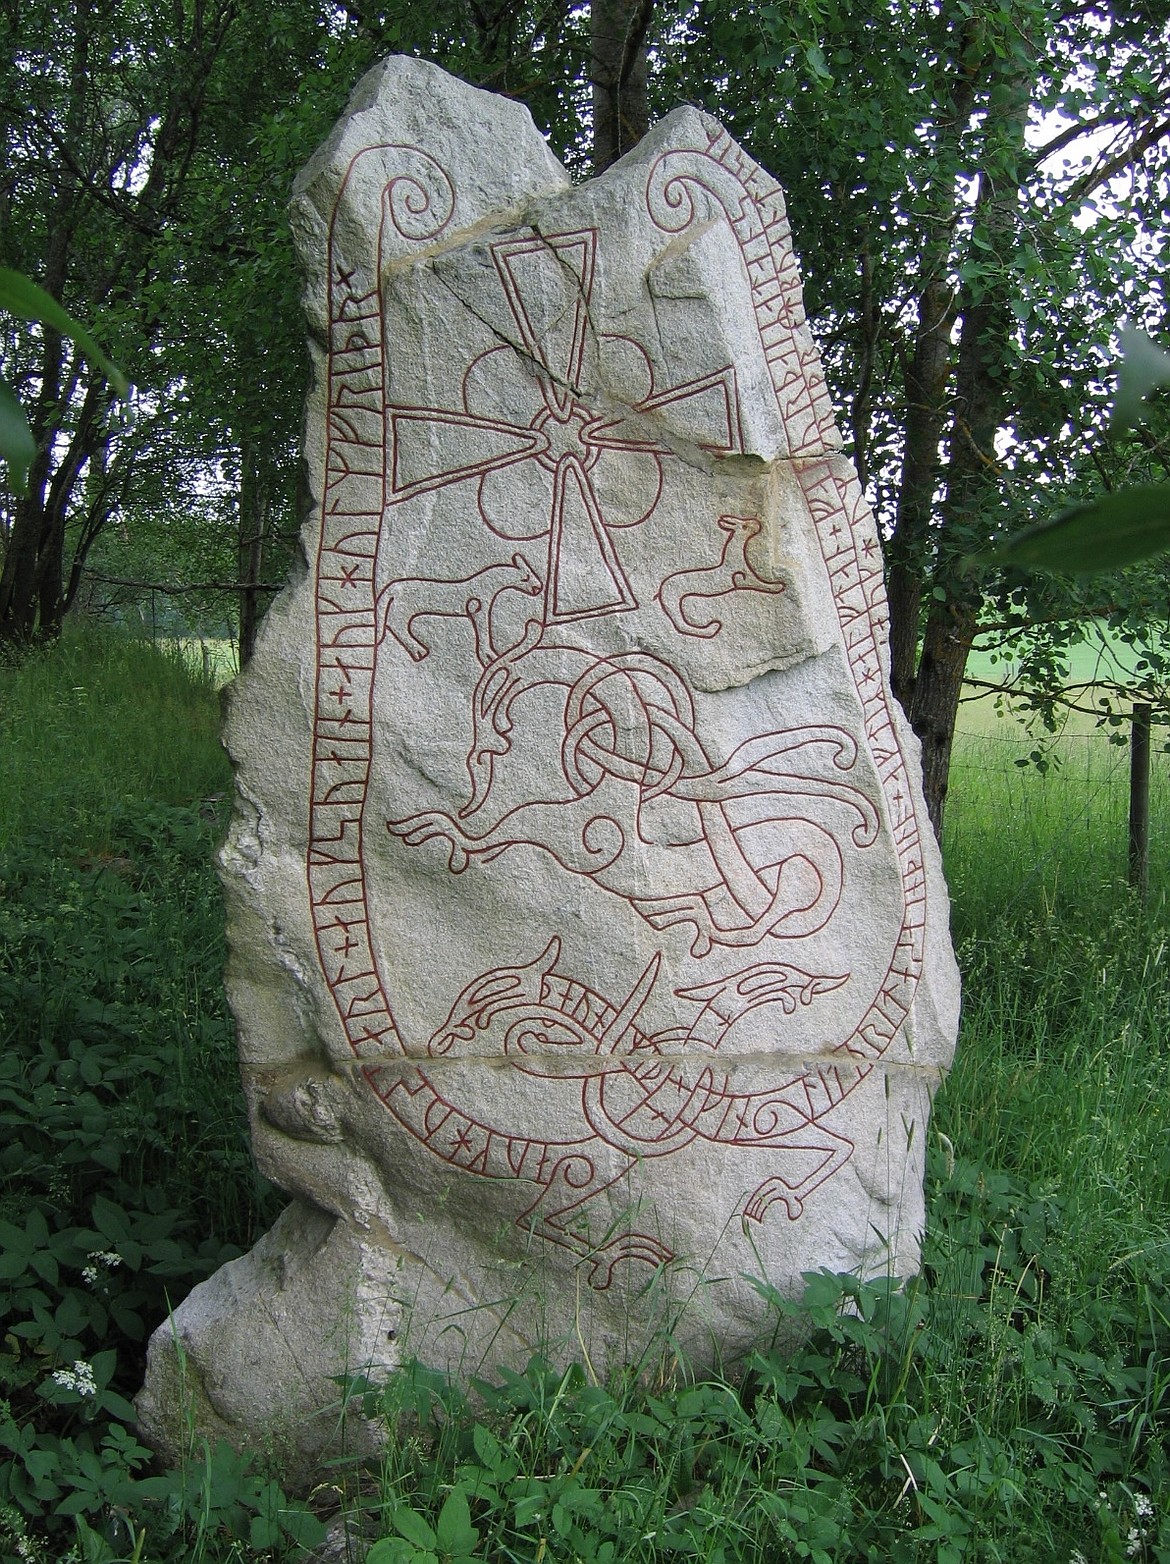 The Lingsberg 11th century runestone 15 miles north of Stockholm, Sweden, showing Viking writing.